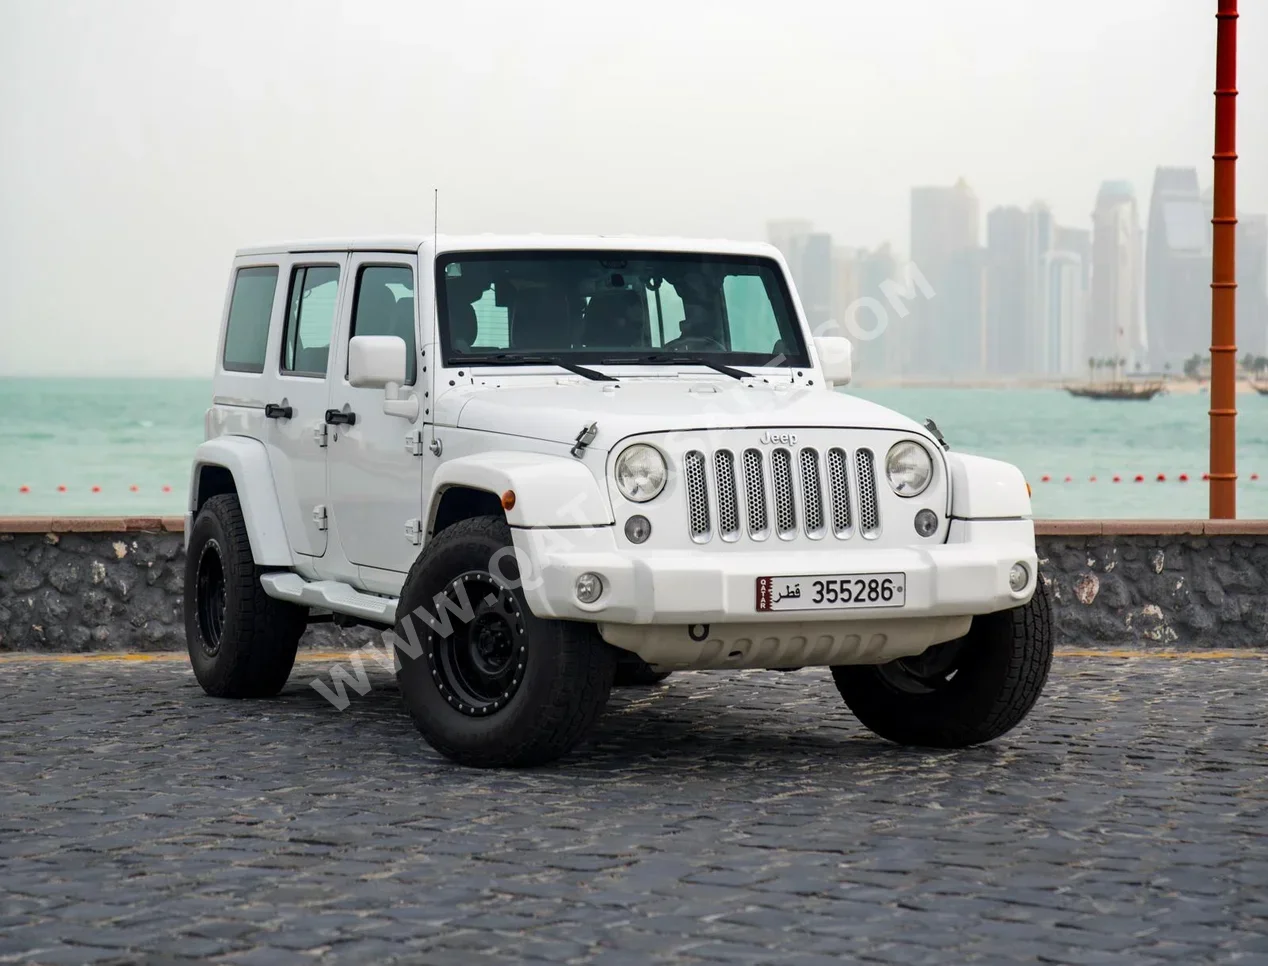 Jeep  Wrangler  Rubicon  2015  Automatic  100,000 Km  6 Cylinder  Four Wheel Drive (4WD)  SUV  White